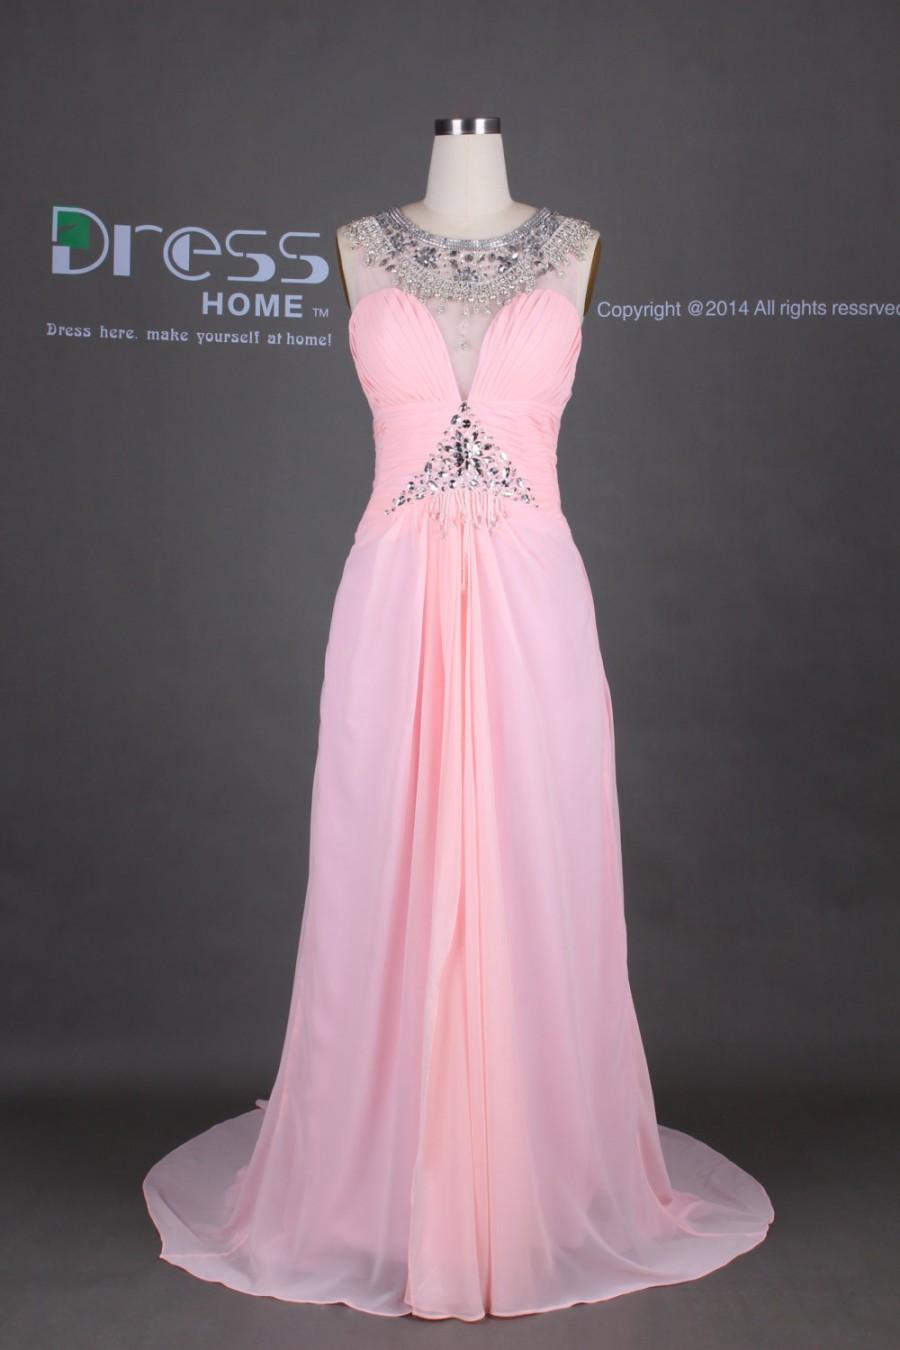 Mariage - Pink Round Neck Beading Long Prom Dress/See Through Open Back Chiffon Prom Dress/Sexy Long Party Dress/Evening Gown/Prom Dresses DH371